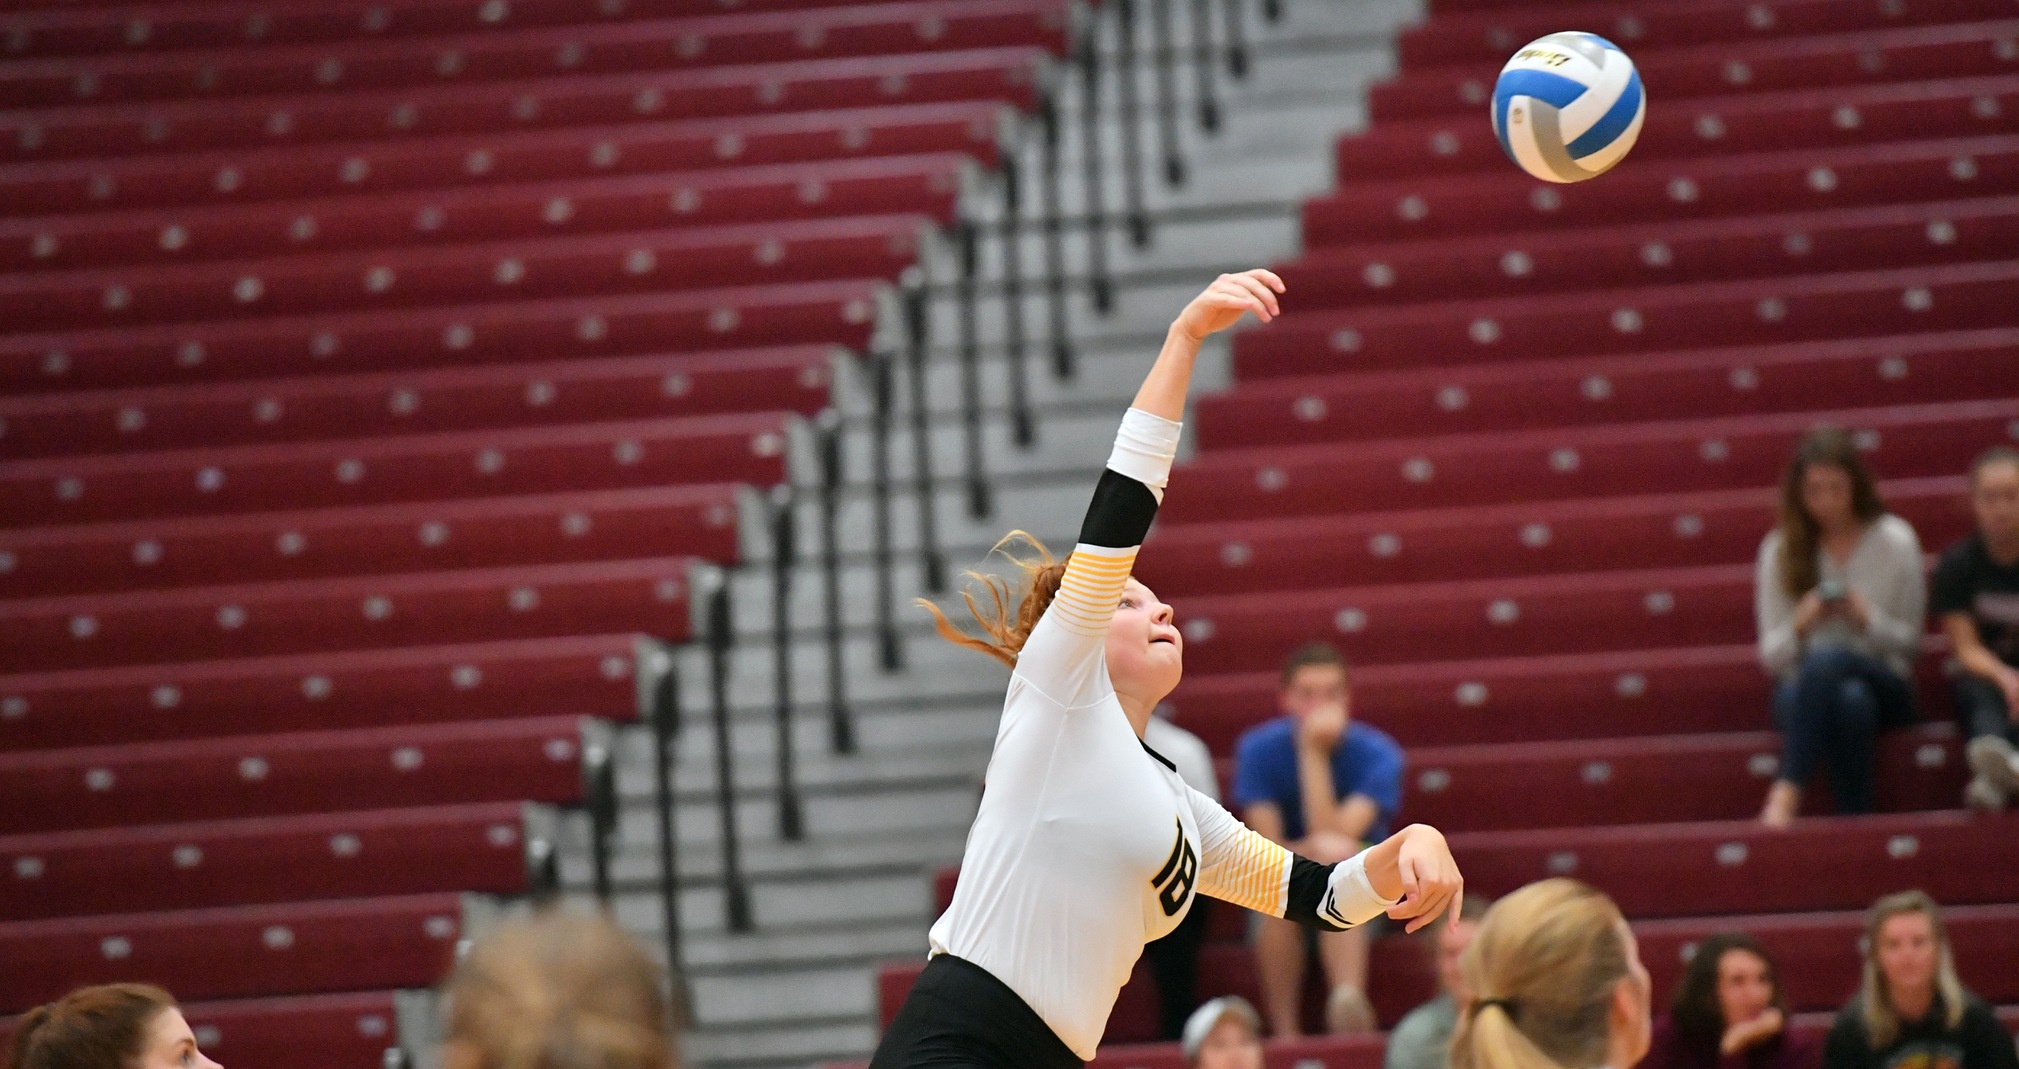 Renee Rush had seven kills, eight digs and two blocks against the Eagles.